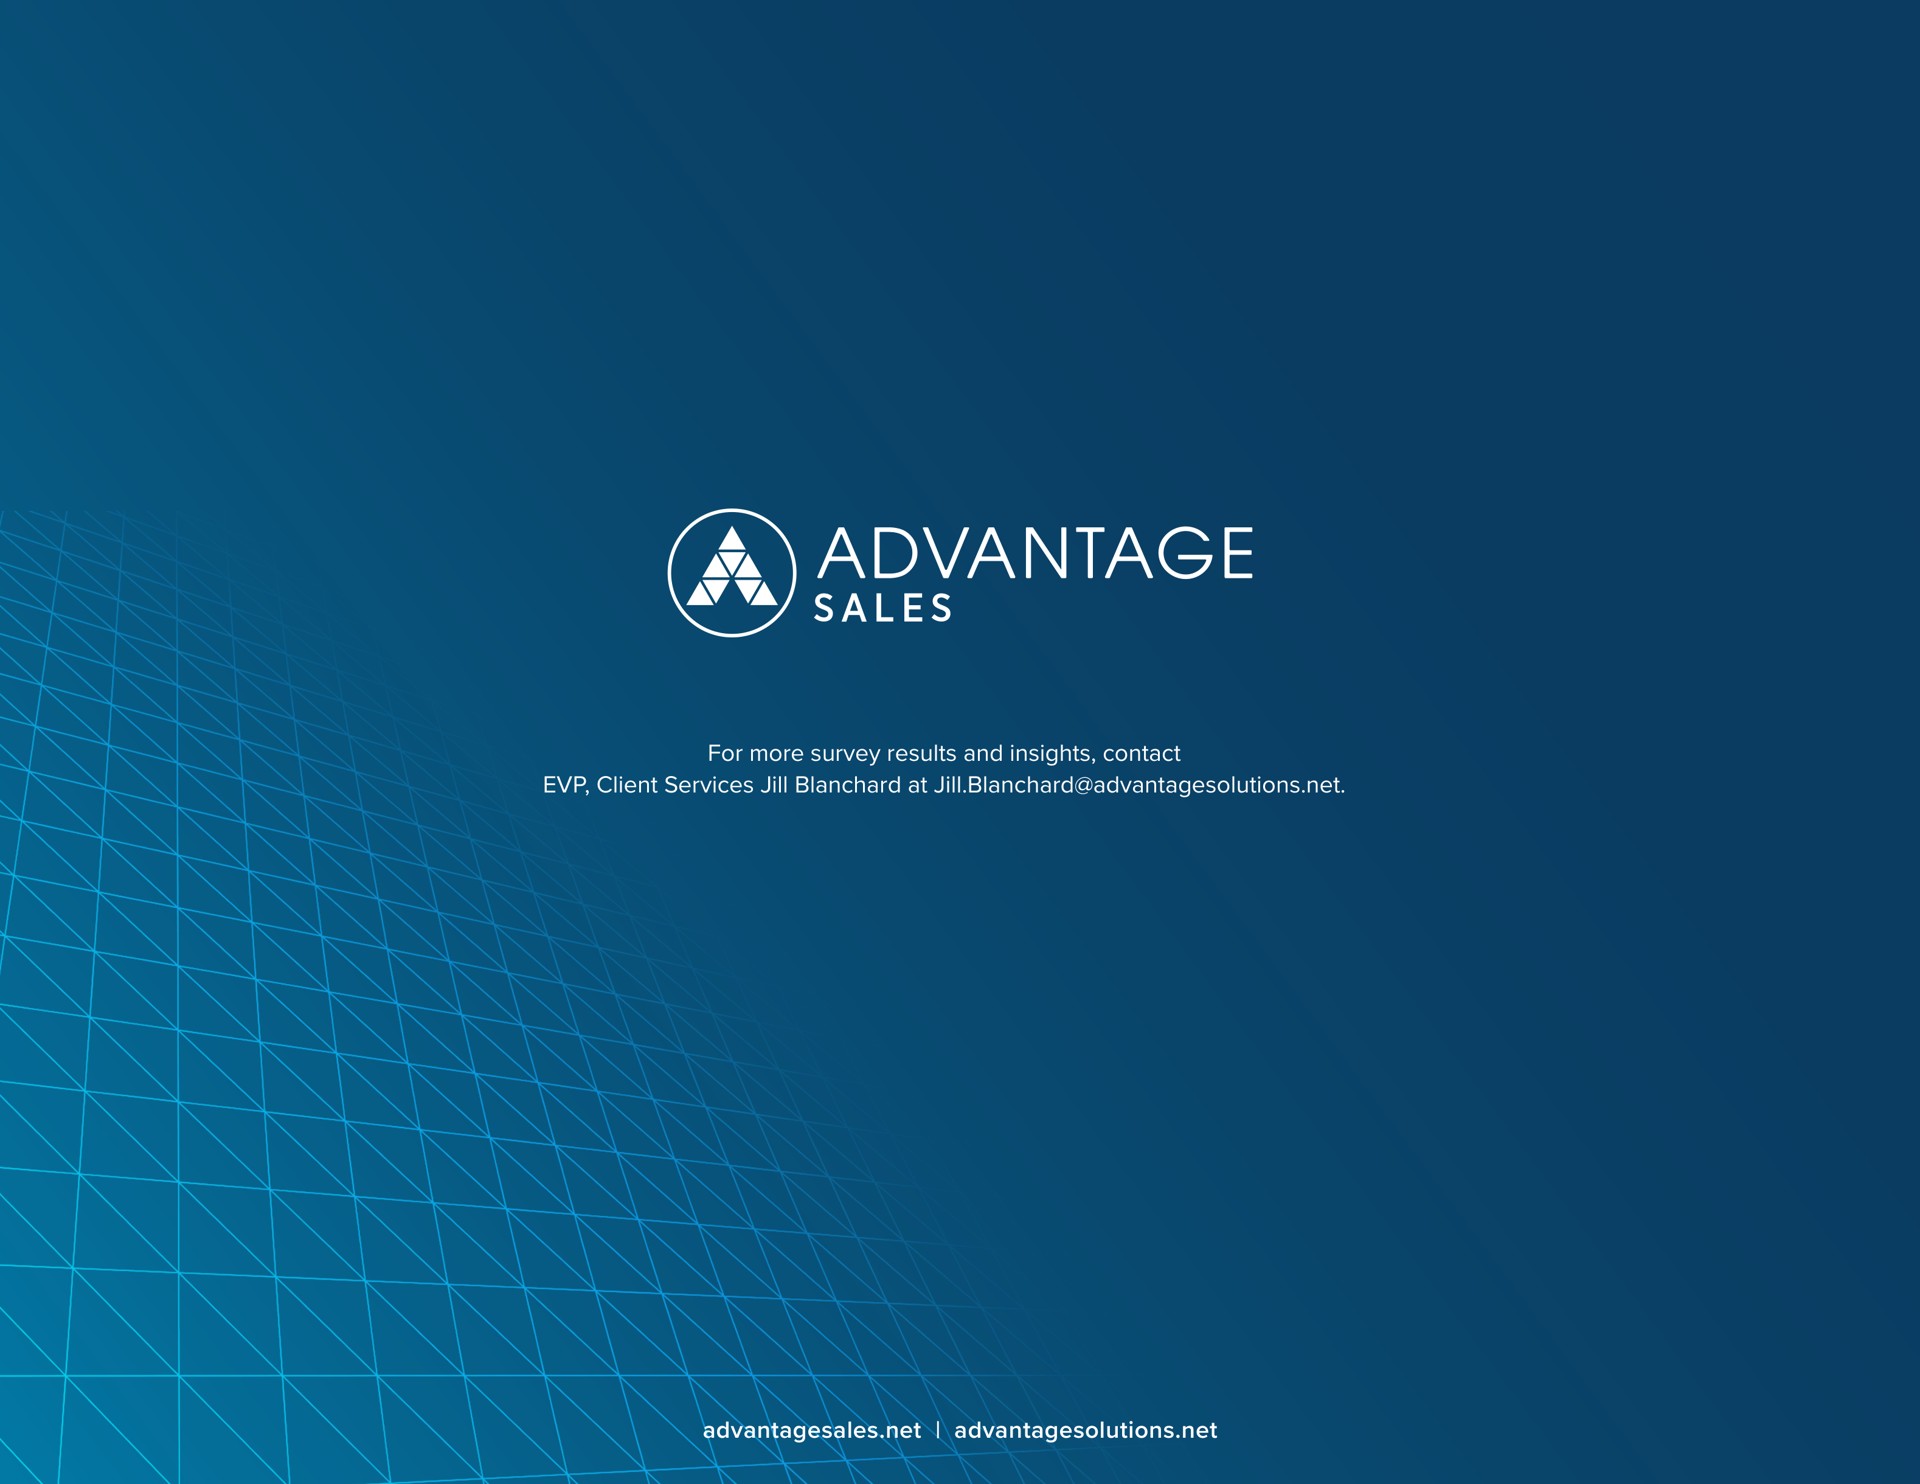 for more survey results and insights contact client services at net net net advantage sales | Advantage Solutions